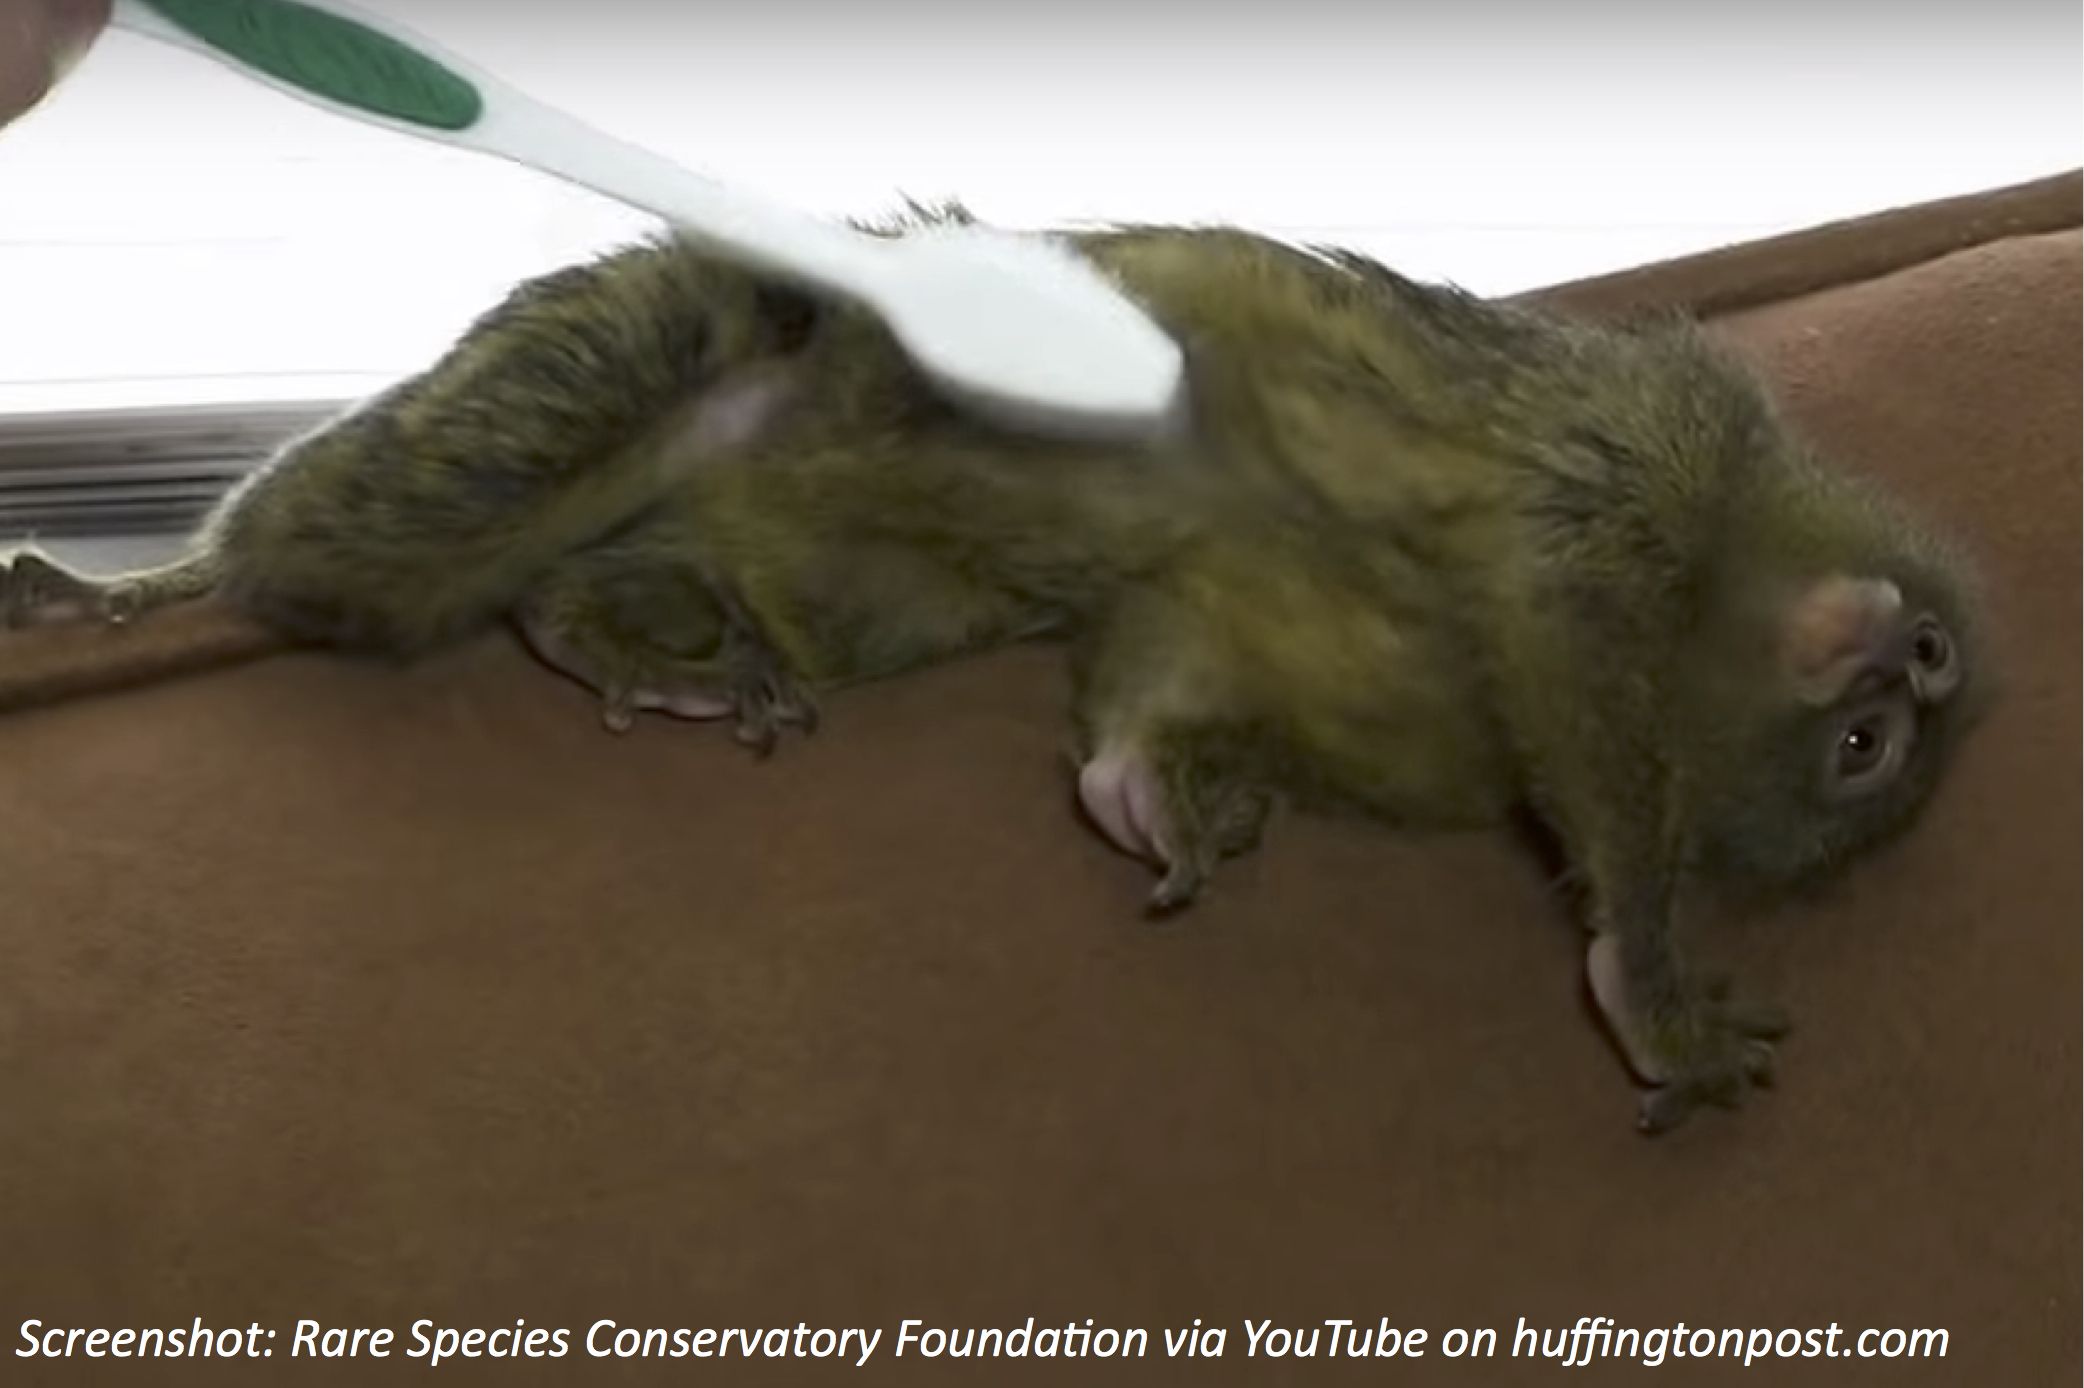 How Monkeys Use a Toothbrush